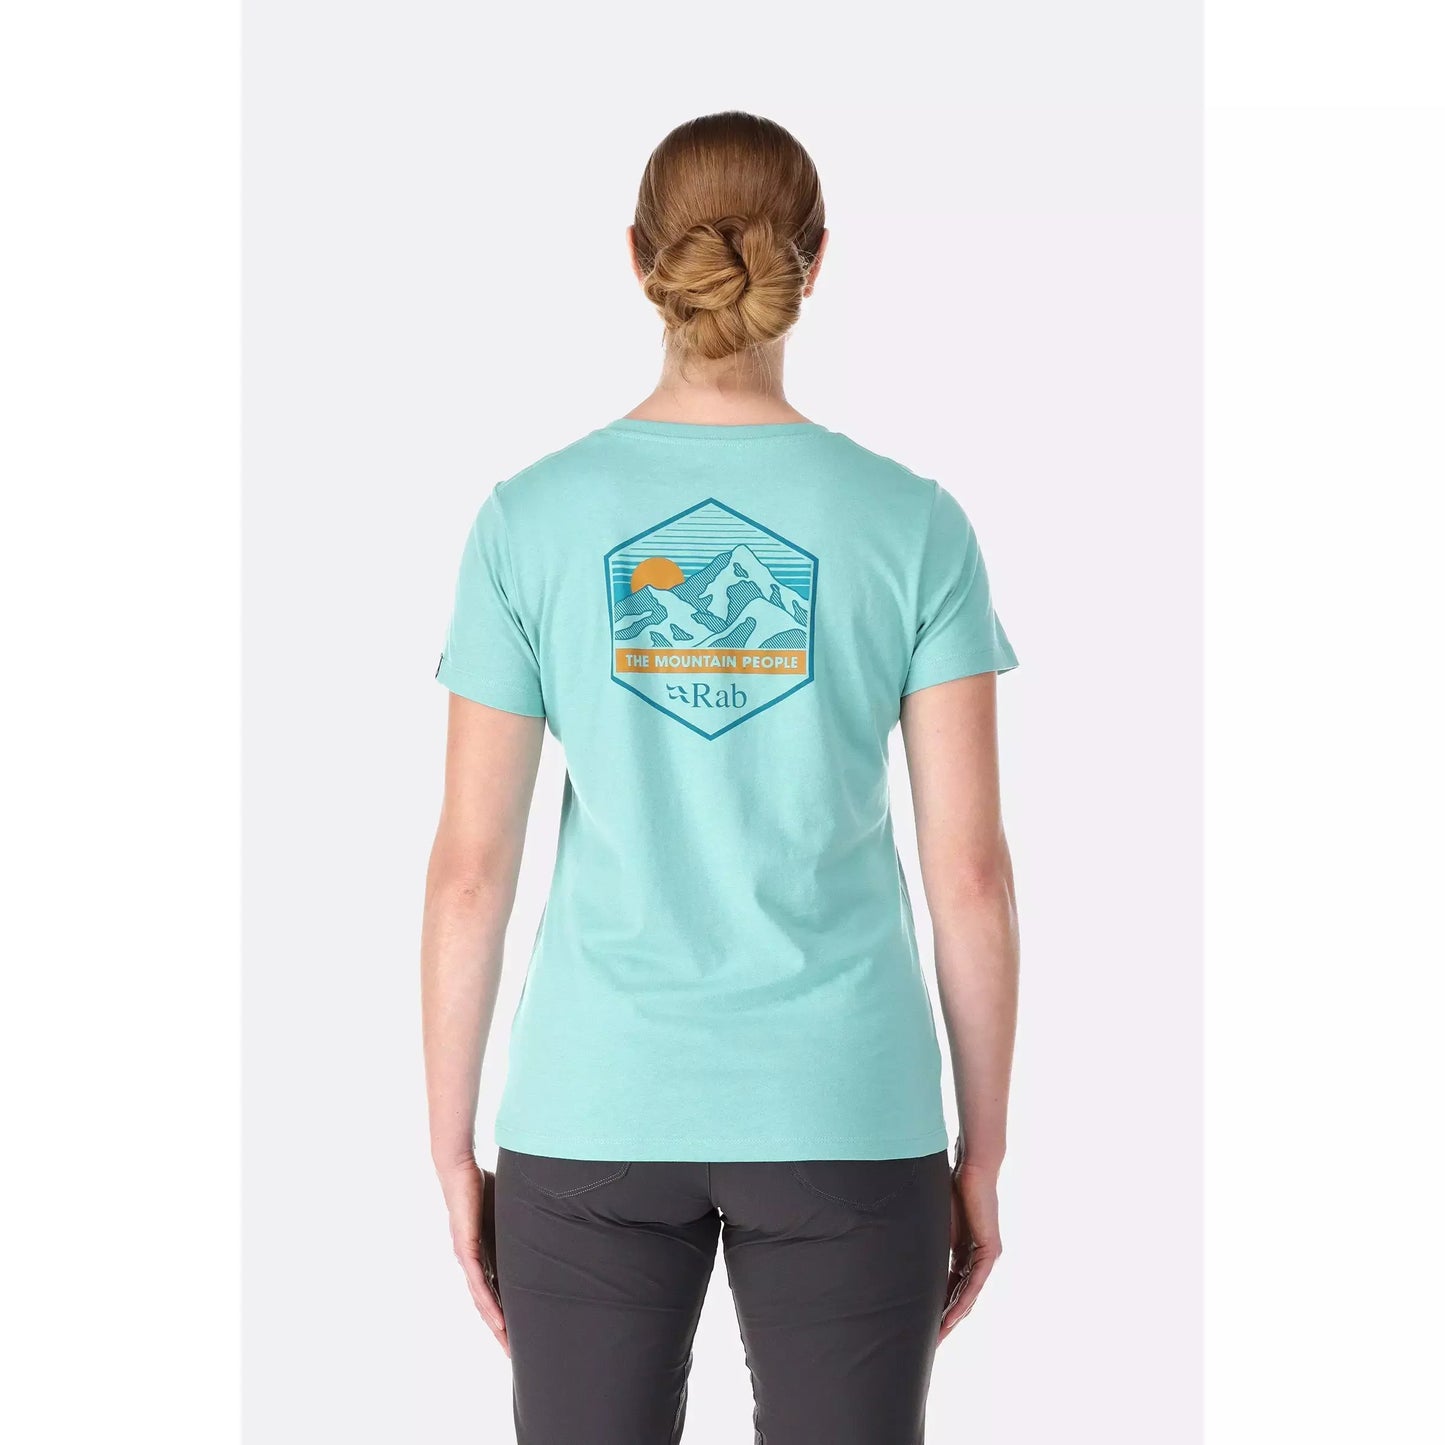 rab Rab womens stance mountain t shirt meltwater